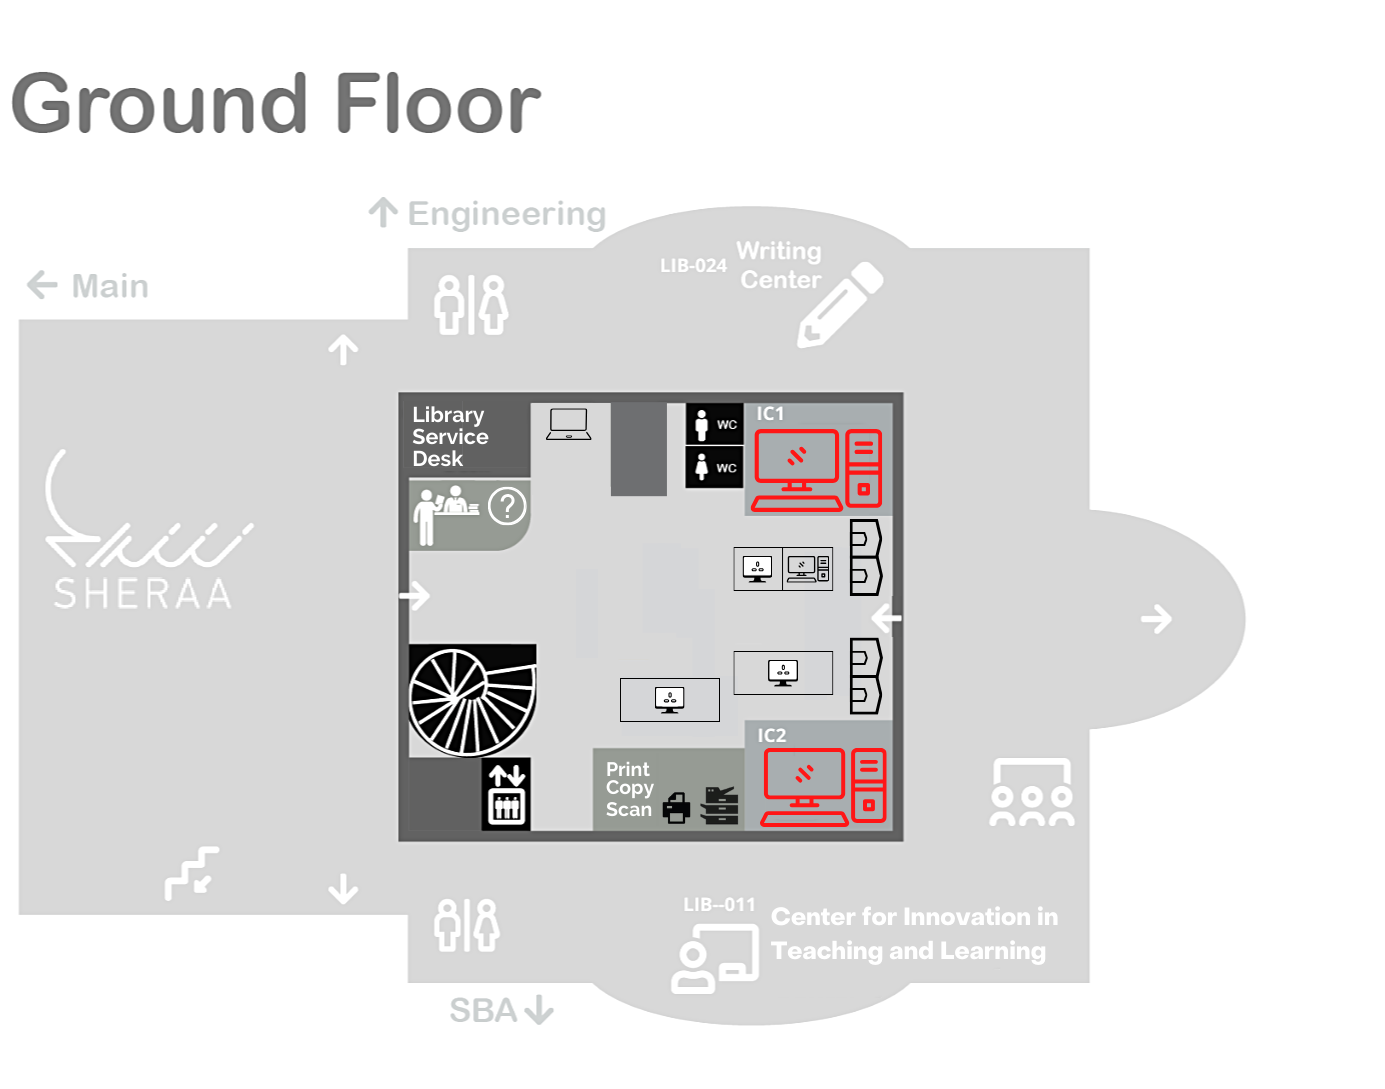 PCs IC21 and IC2 Ground Floor Map